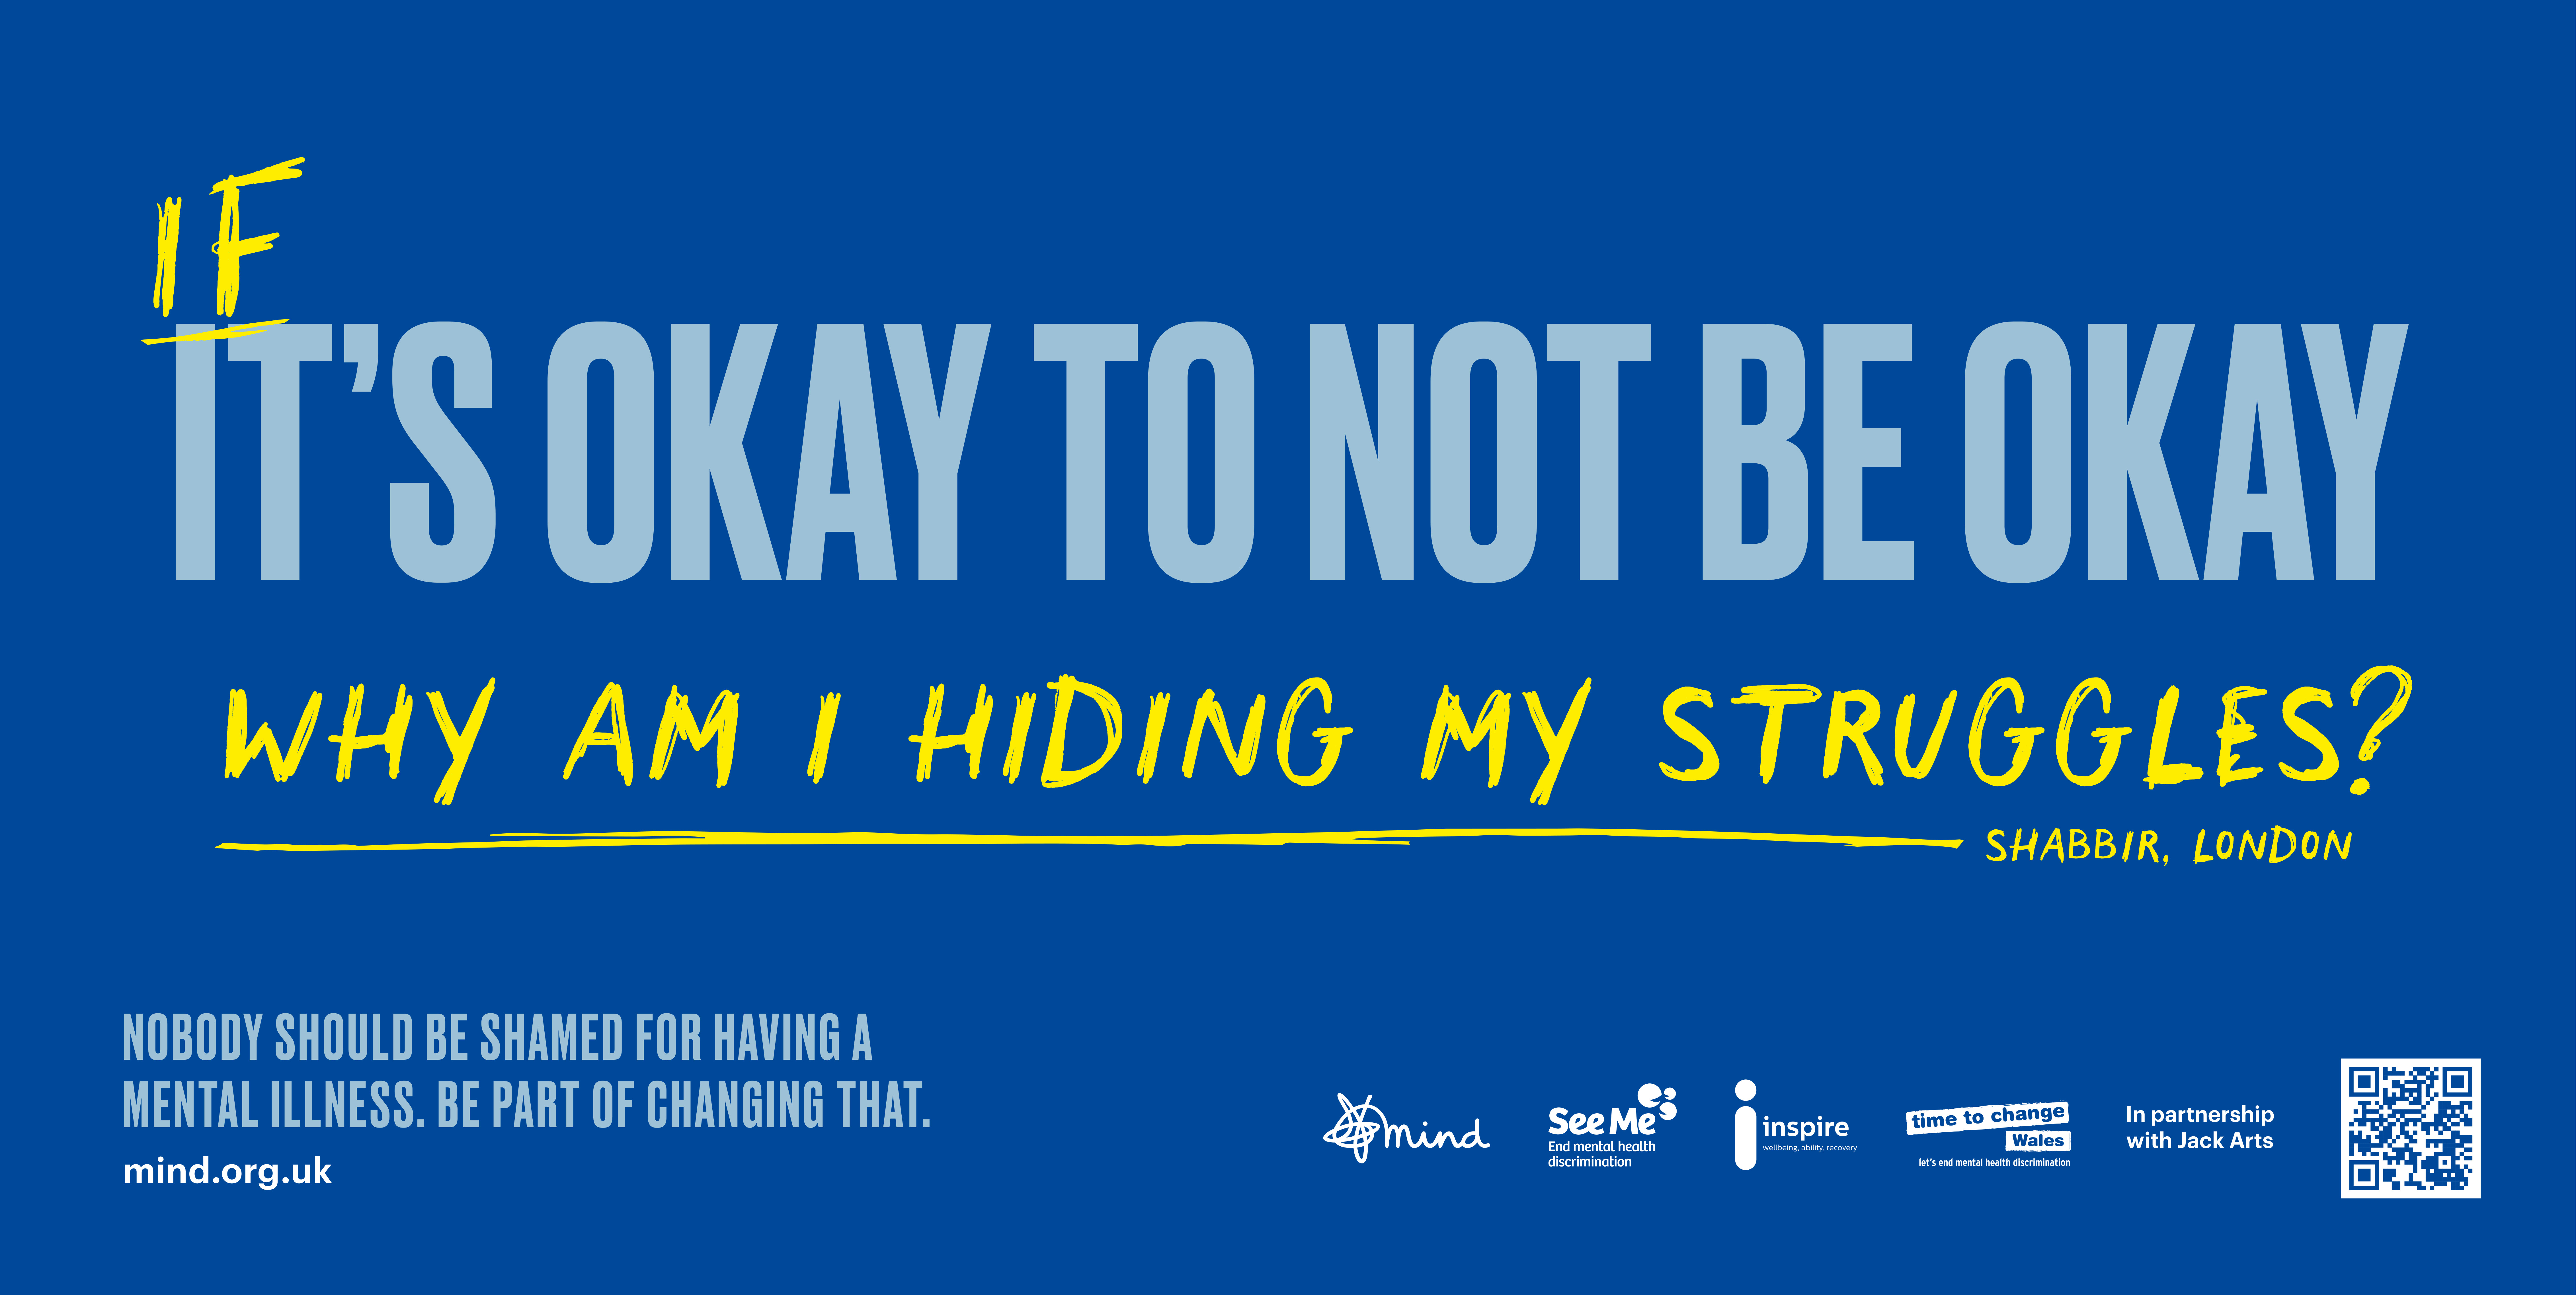 Campaign image that says 'If it's okay to not be okay, why am I hiding my struggles?'